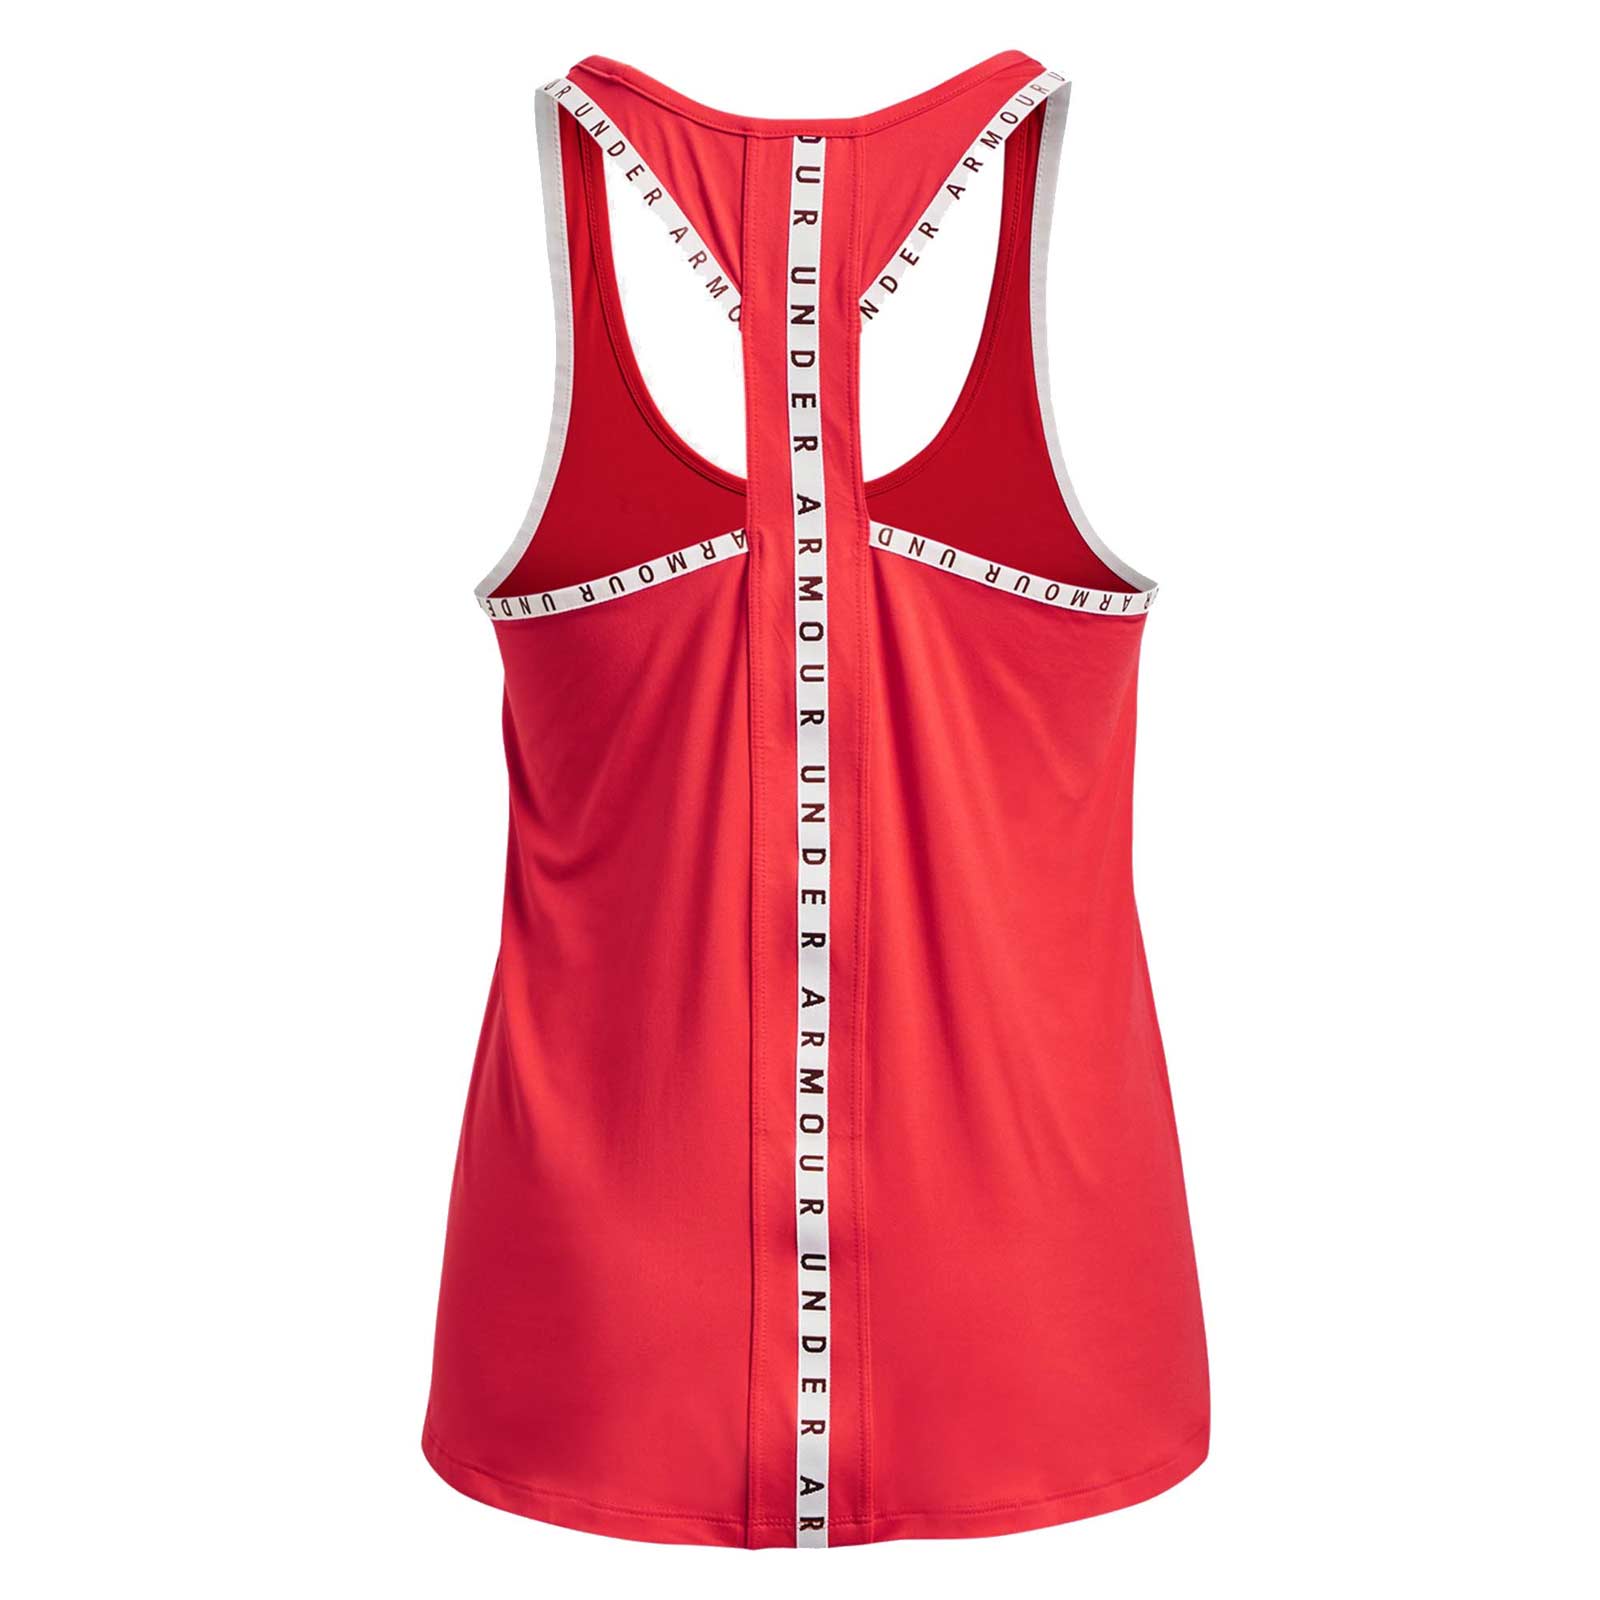 UNDER ARMOUR WOMENS KNOCKOUT TANK